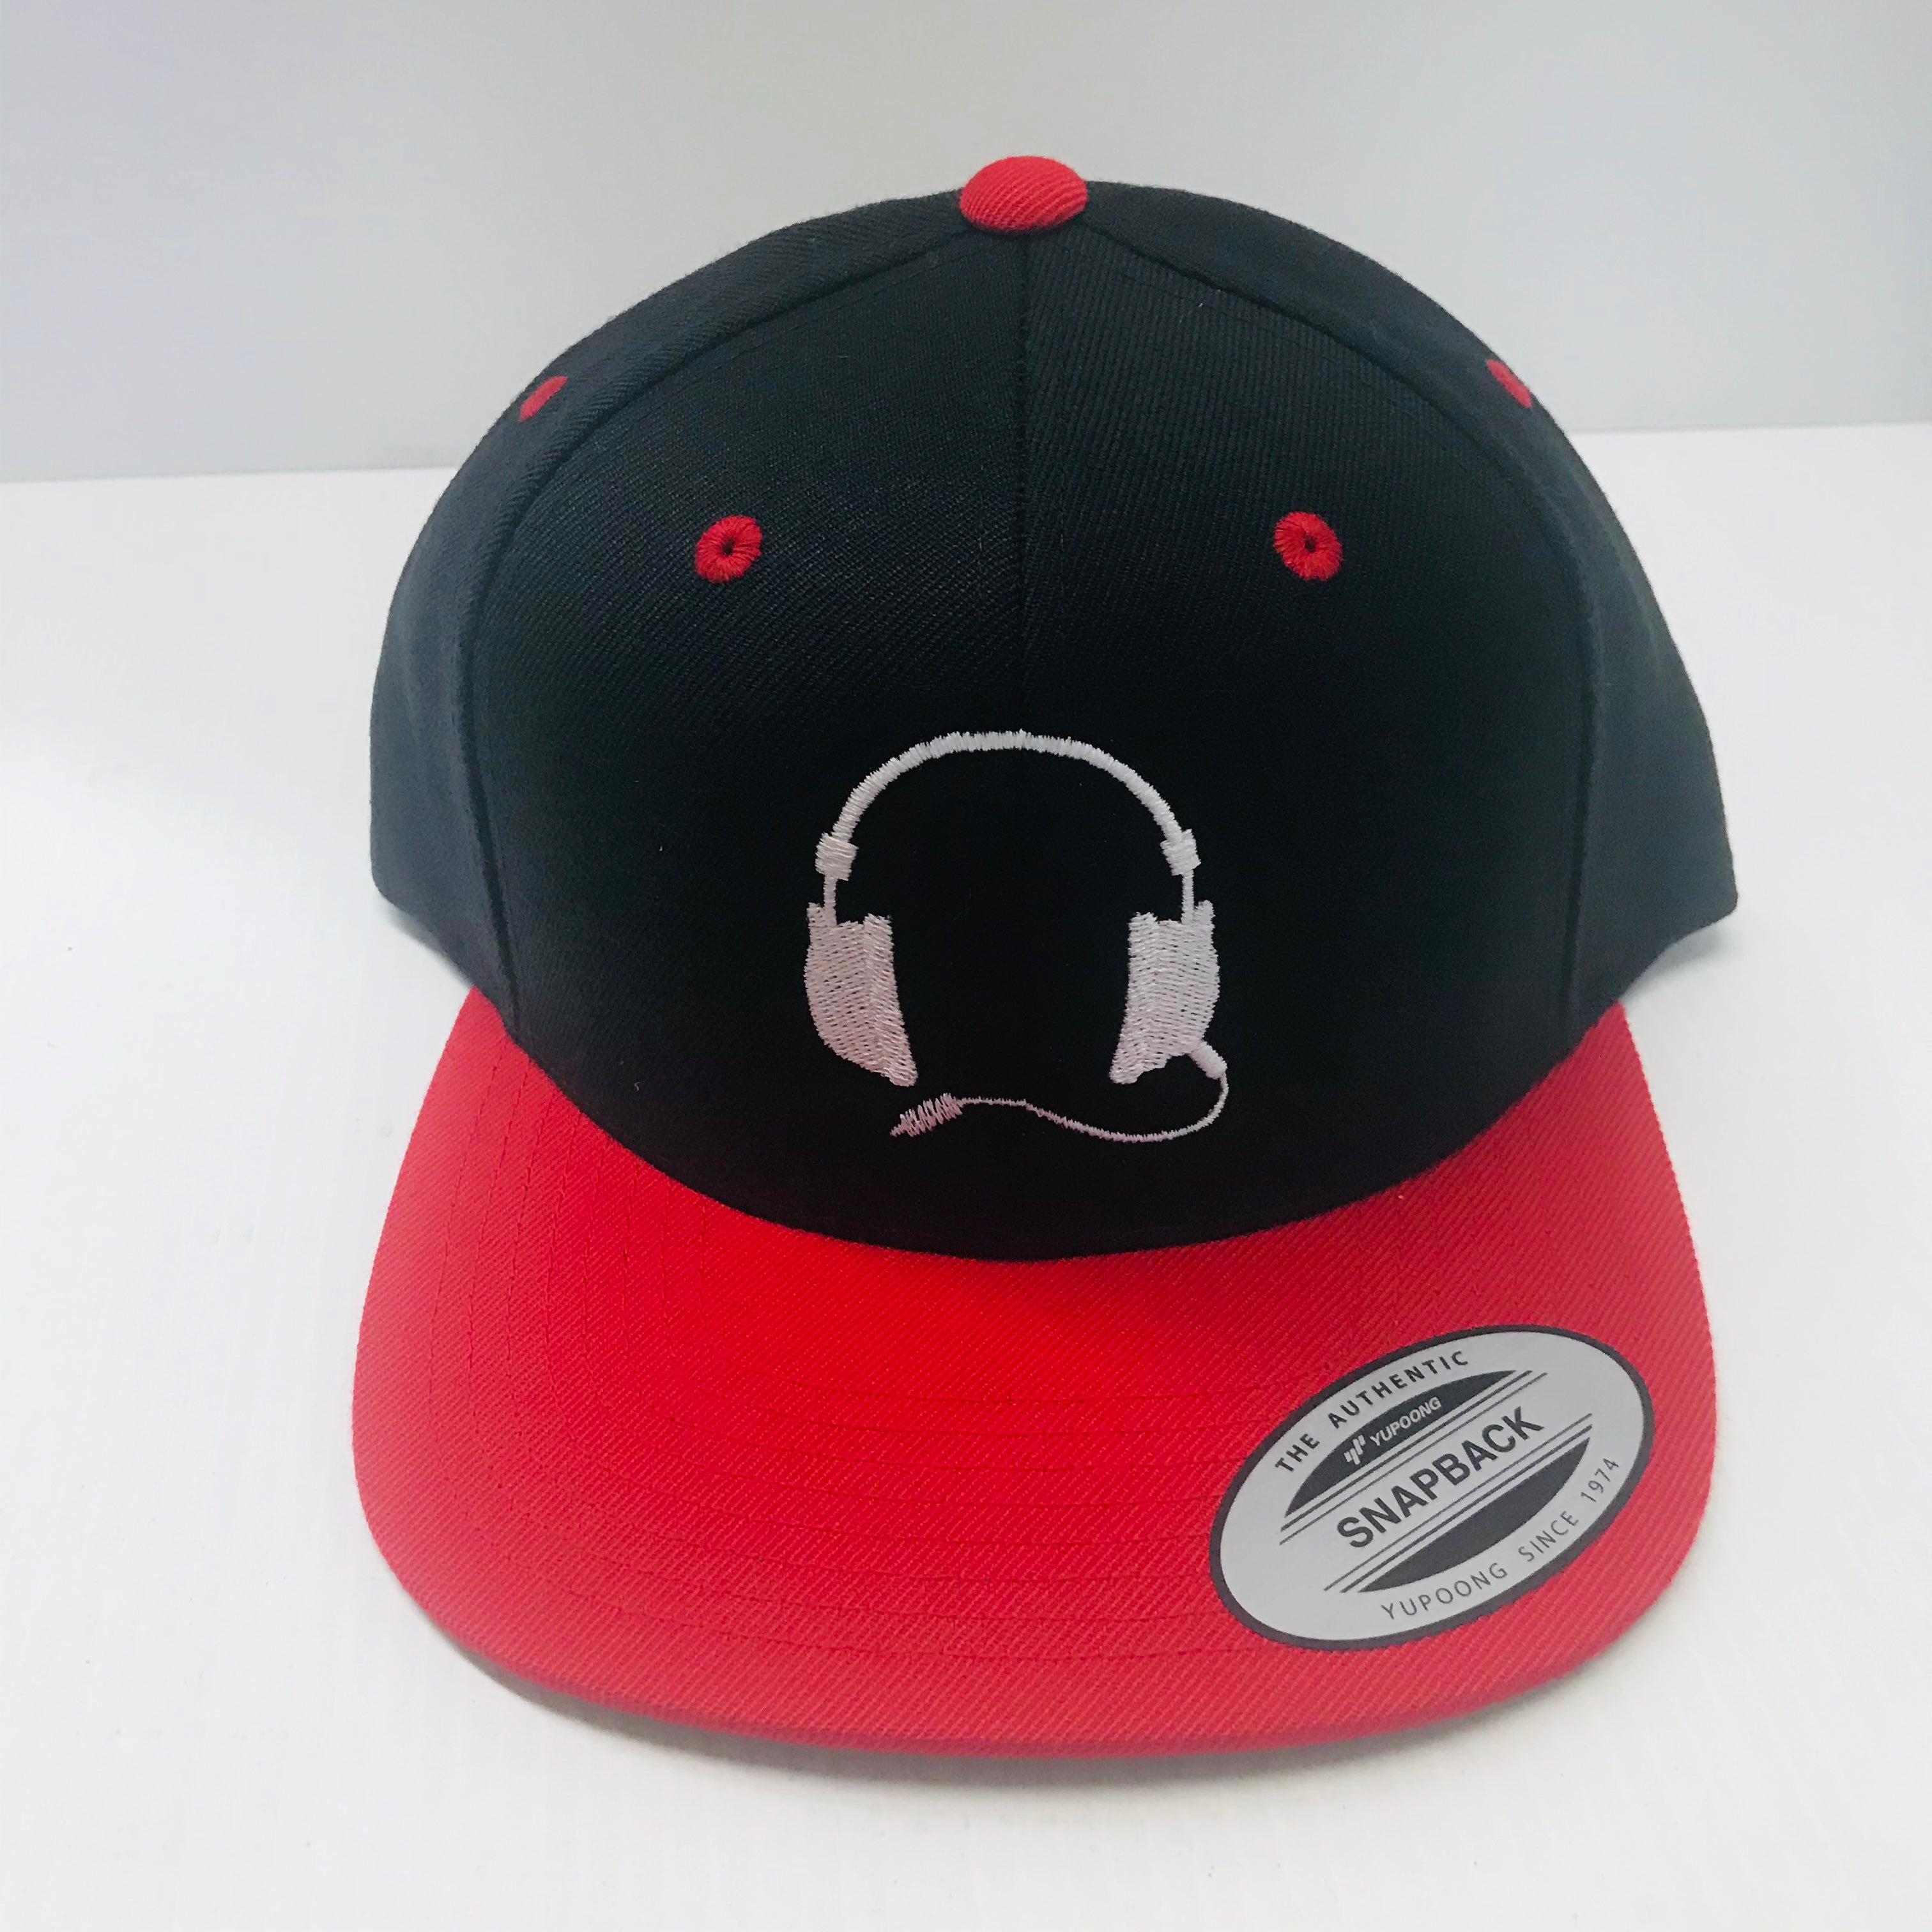 Black with red cap / white logo